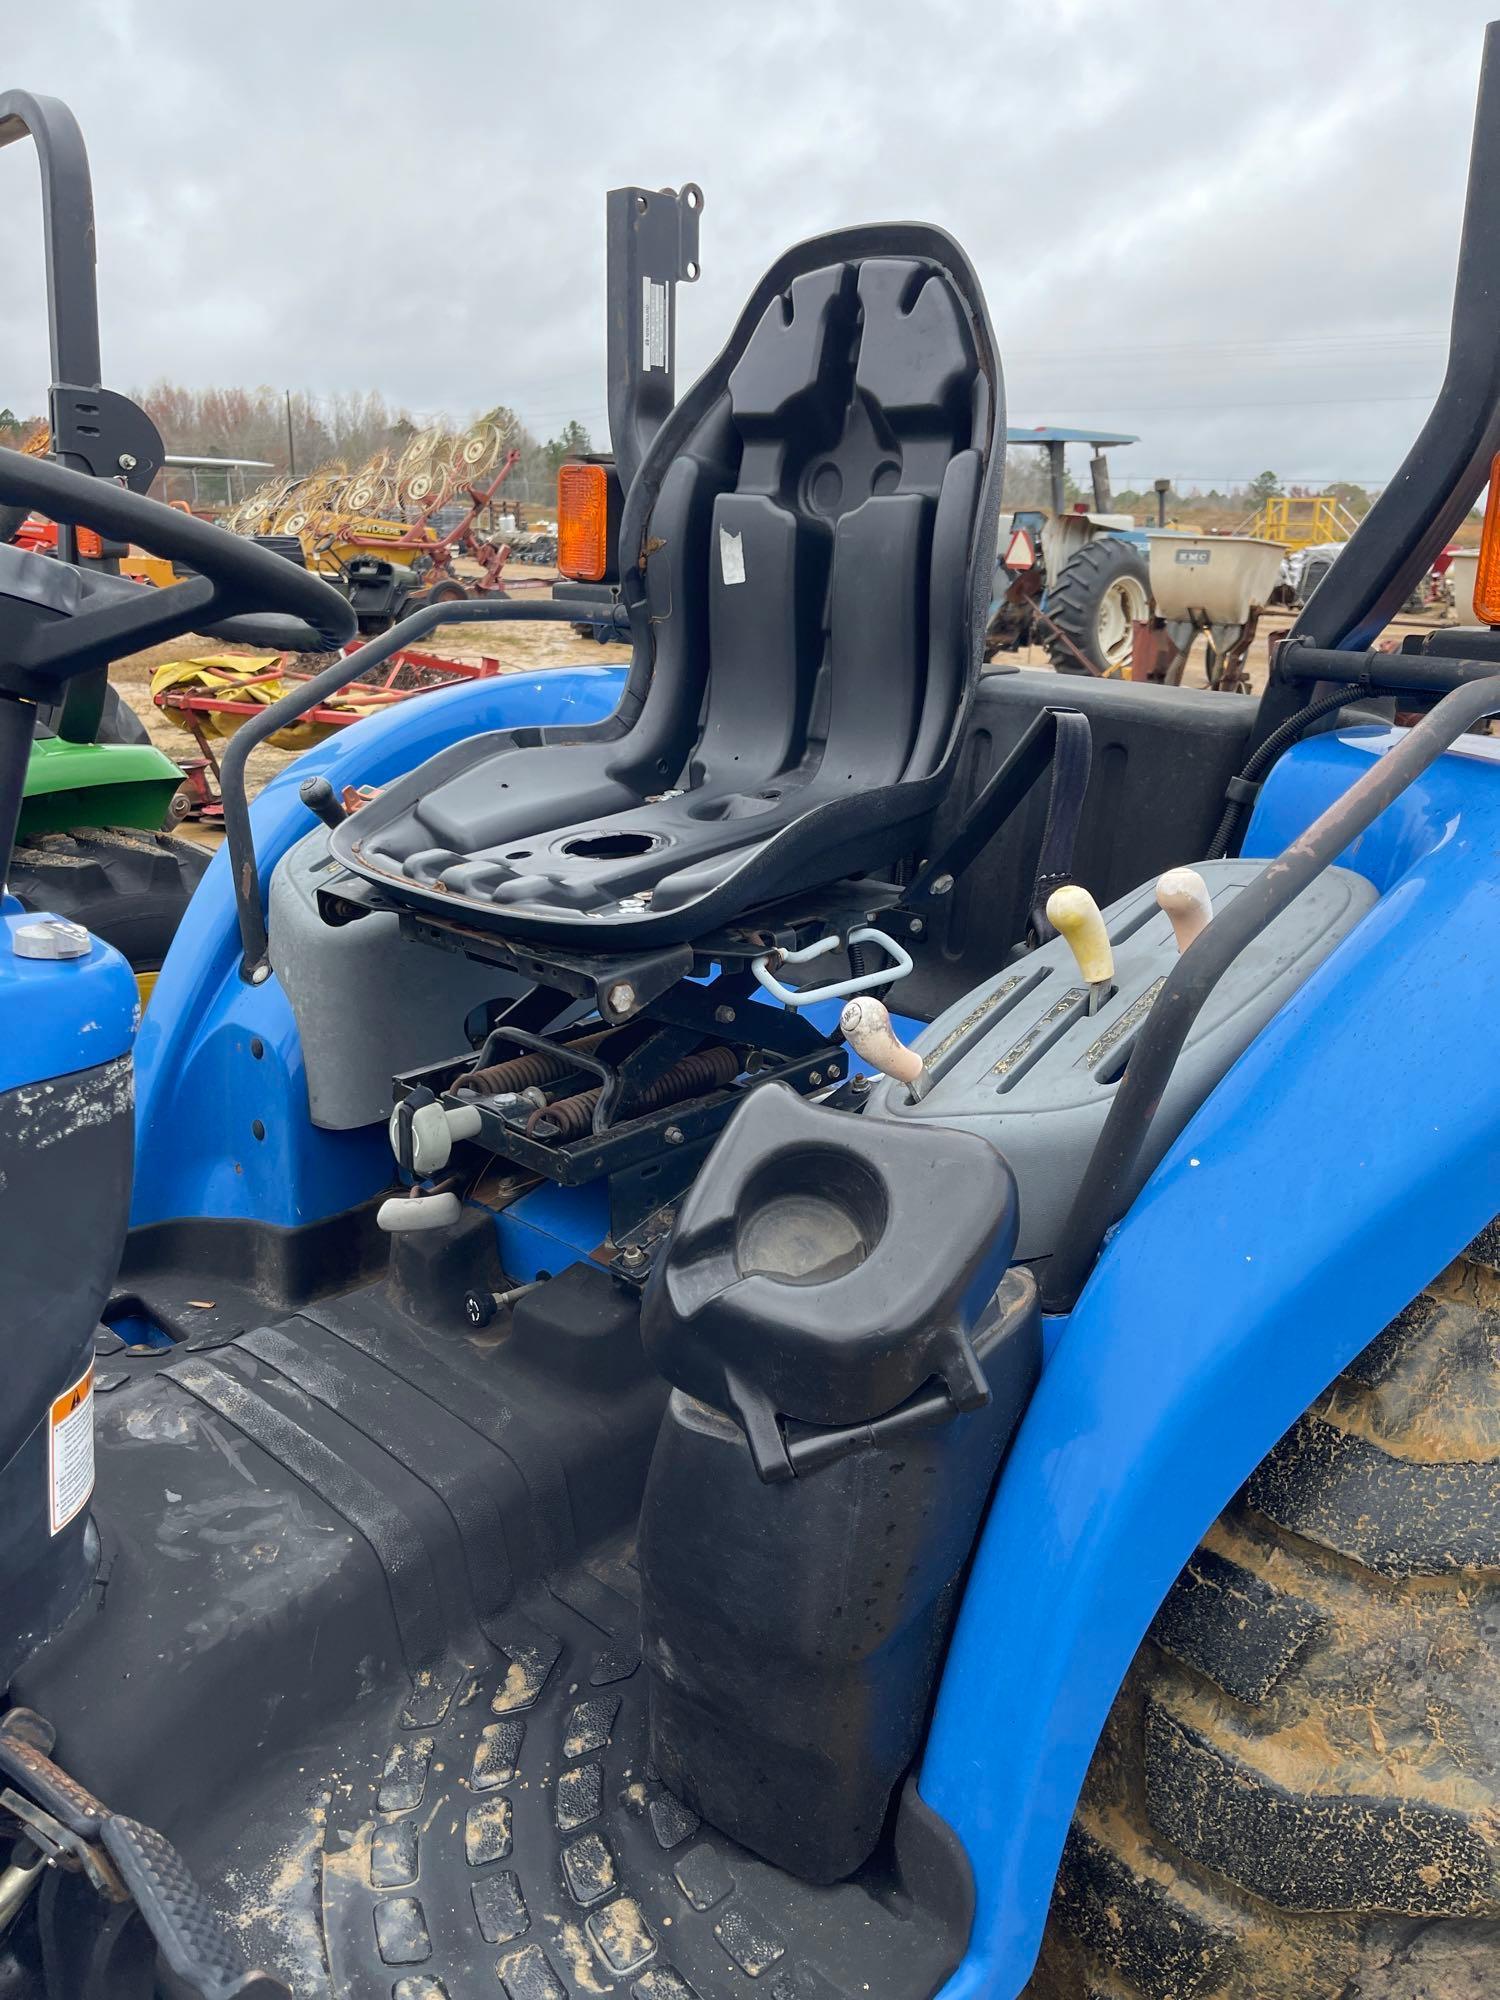 387 - NEW HOLLAND 35D TRACTOR